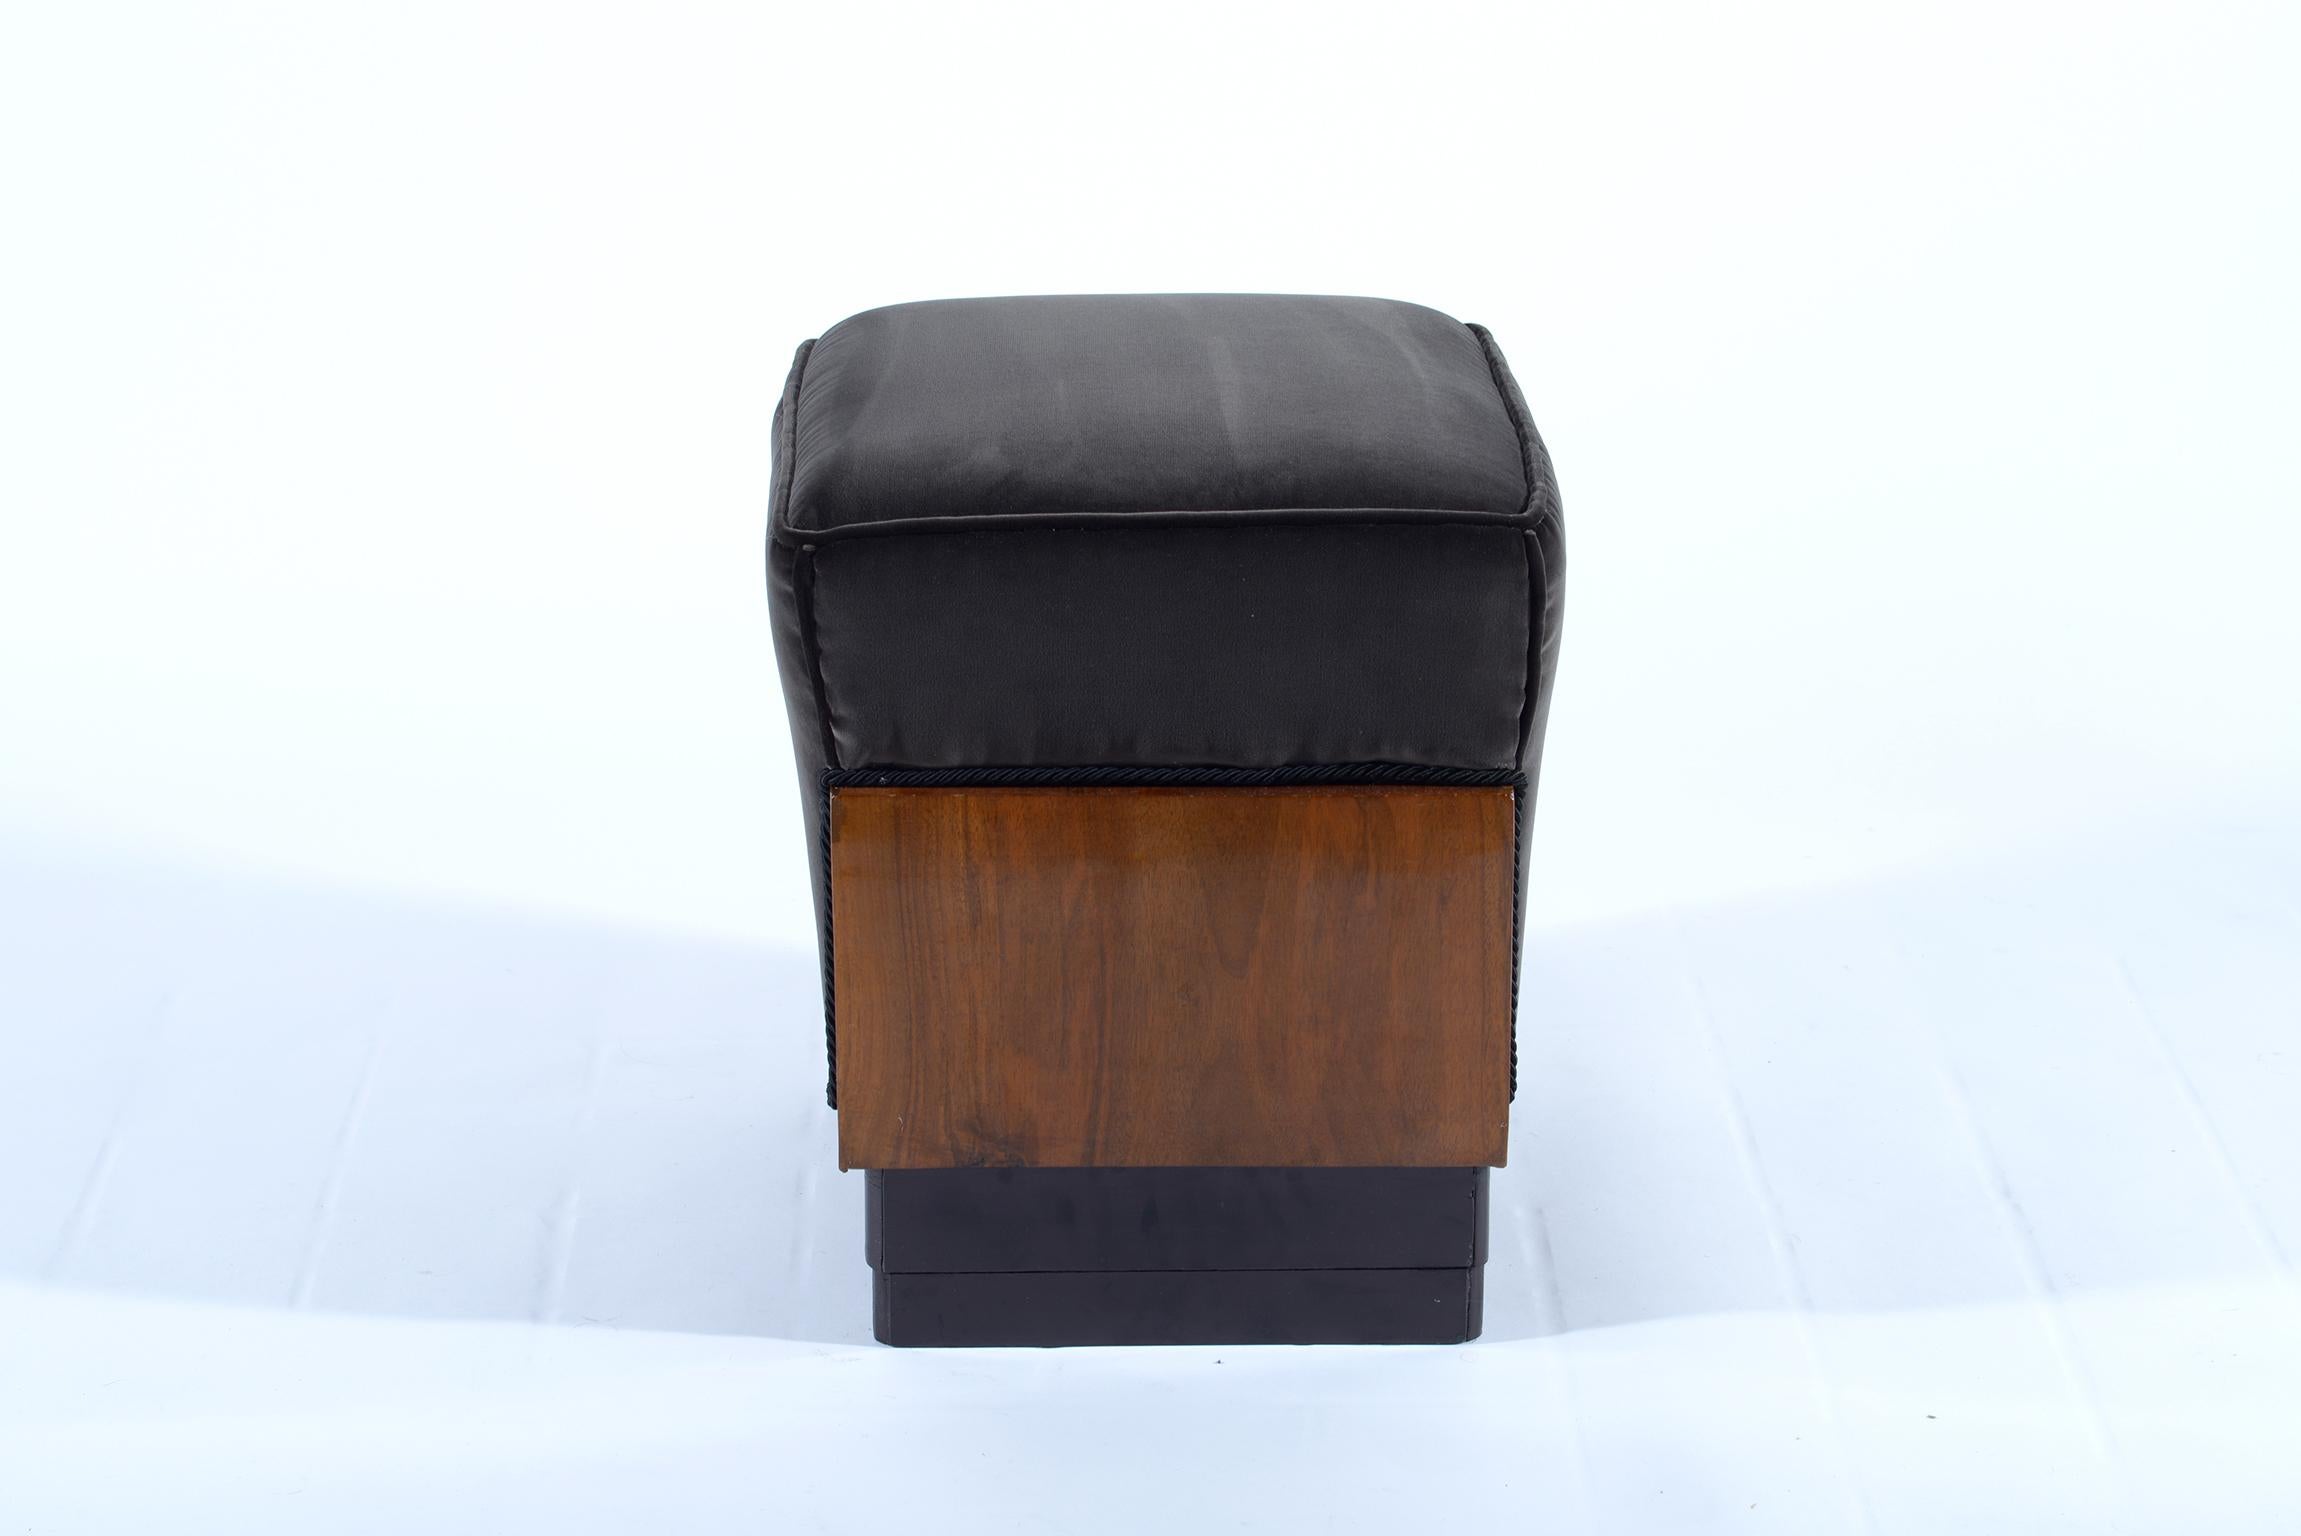 Squared structure in local walnut, degrading base step in ebonized walnut. Covered with new black velvet.
These two art deco stools are a beautiful example of the 